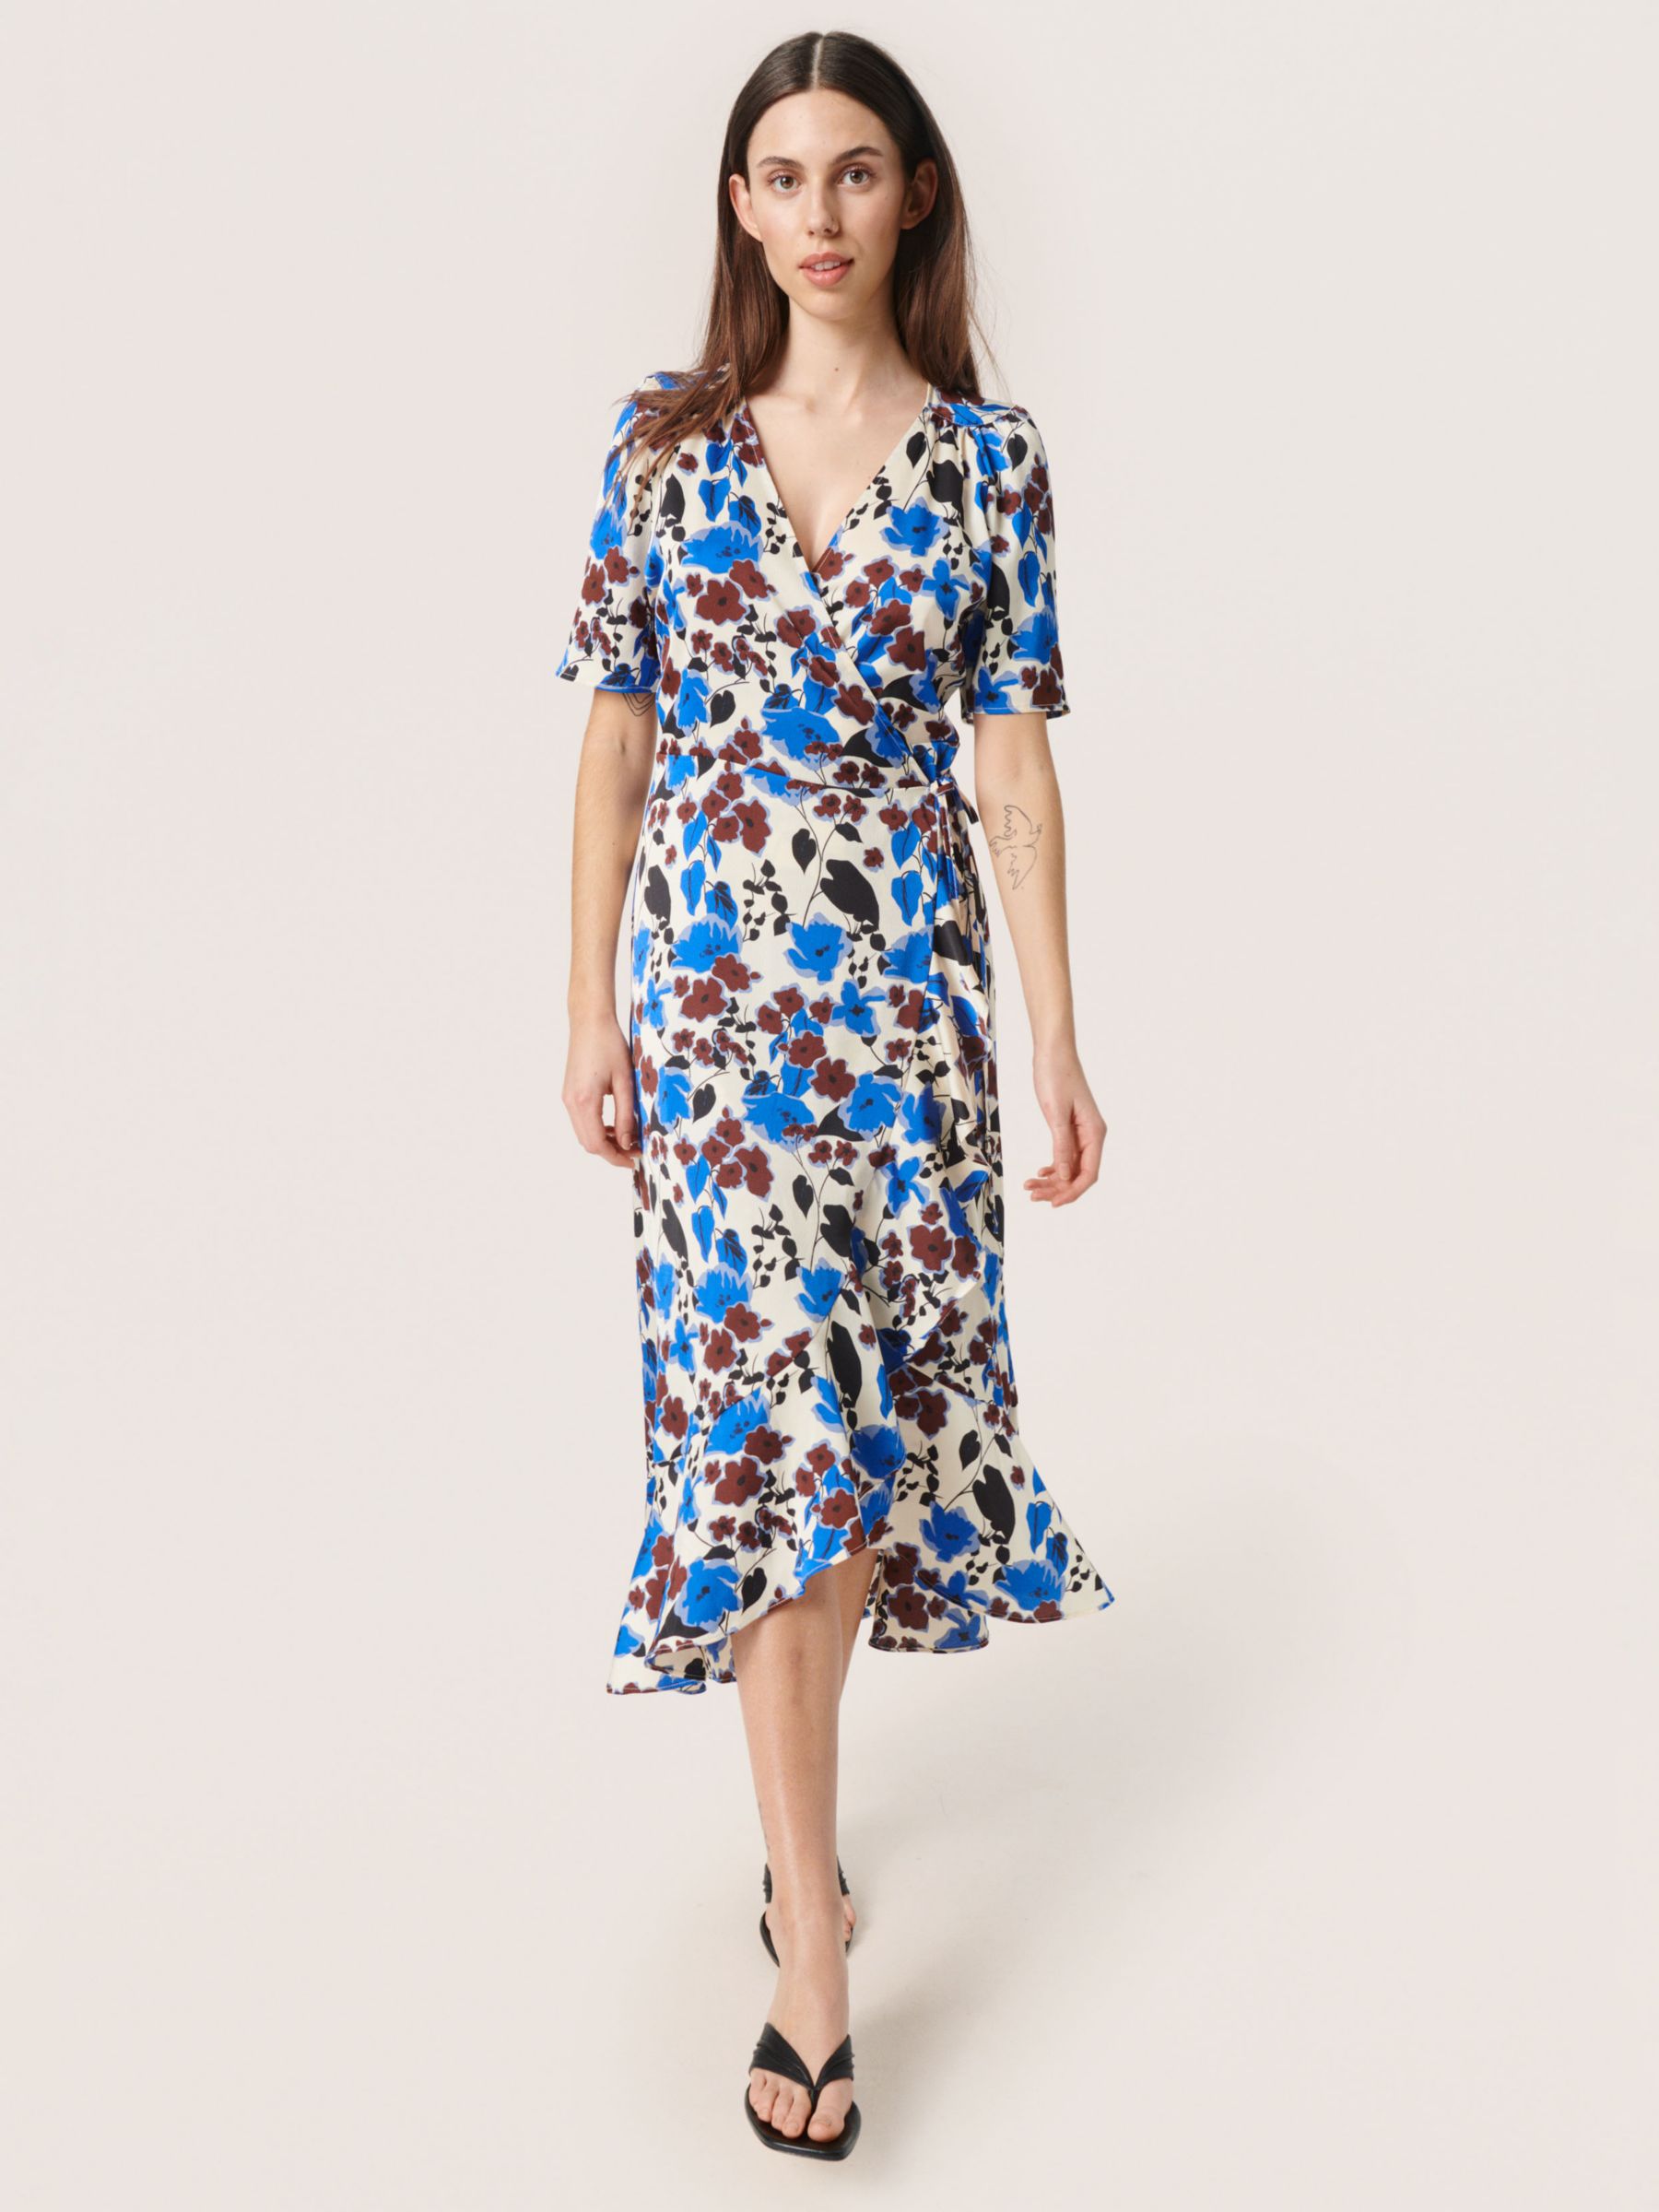 Soaked In Luxury Karven Floral Wrap Dress, Sandshell, XS